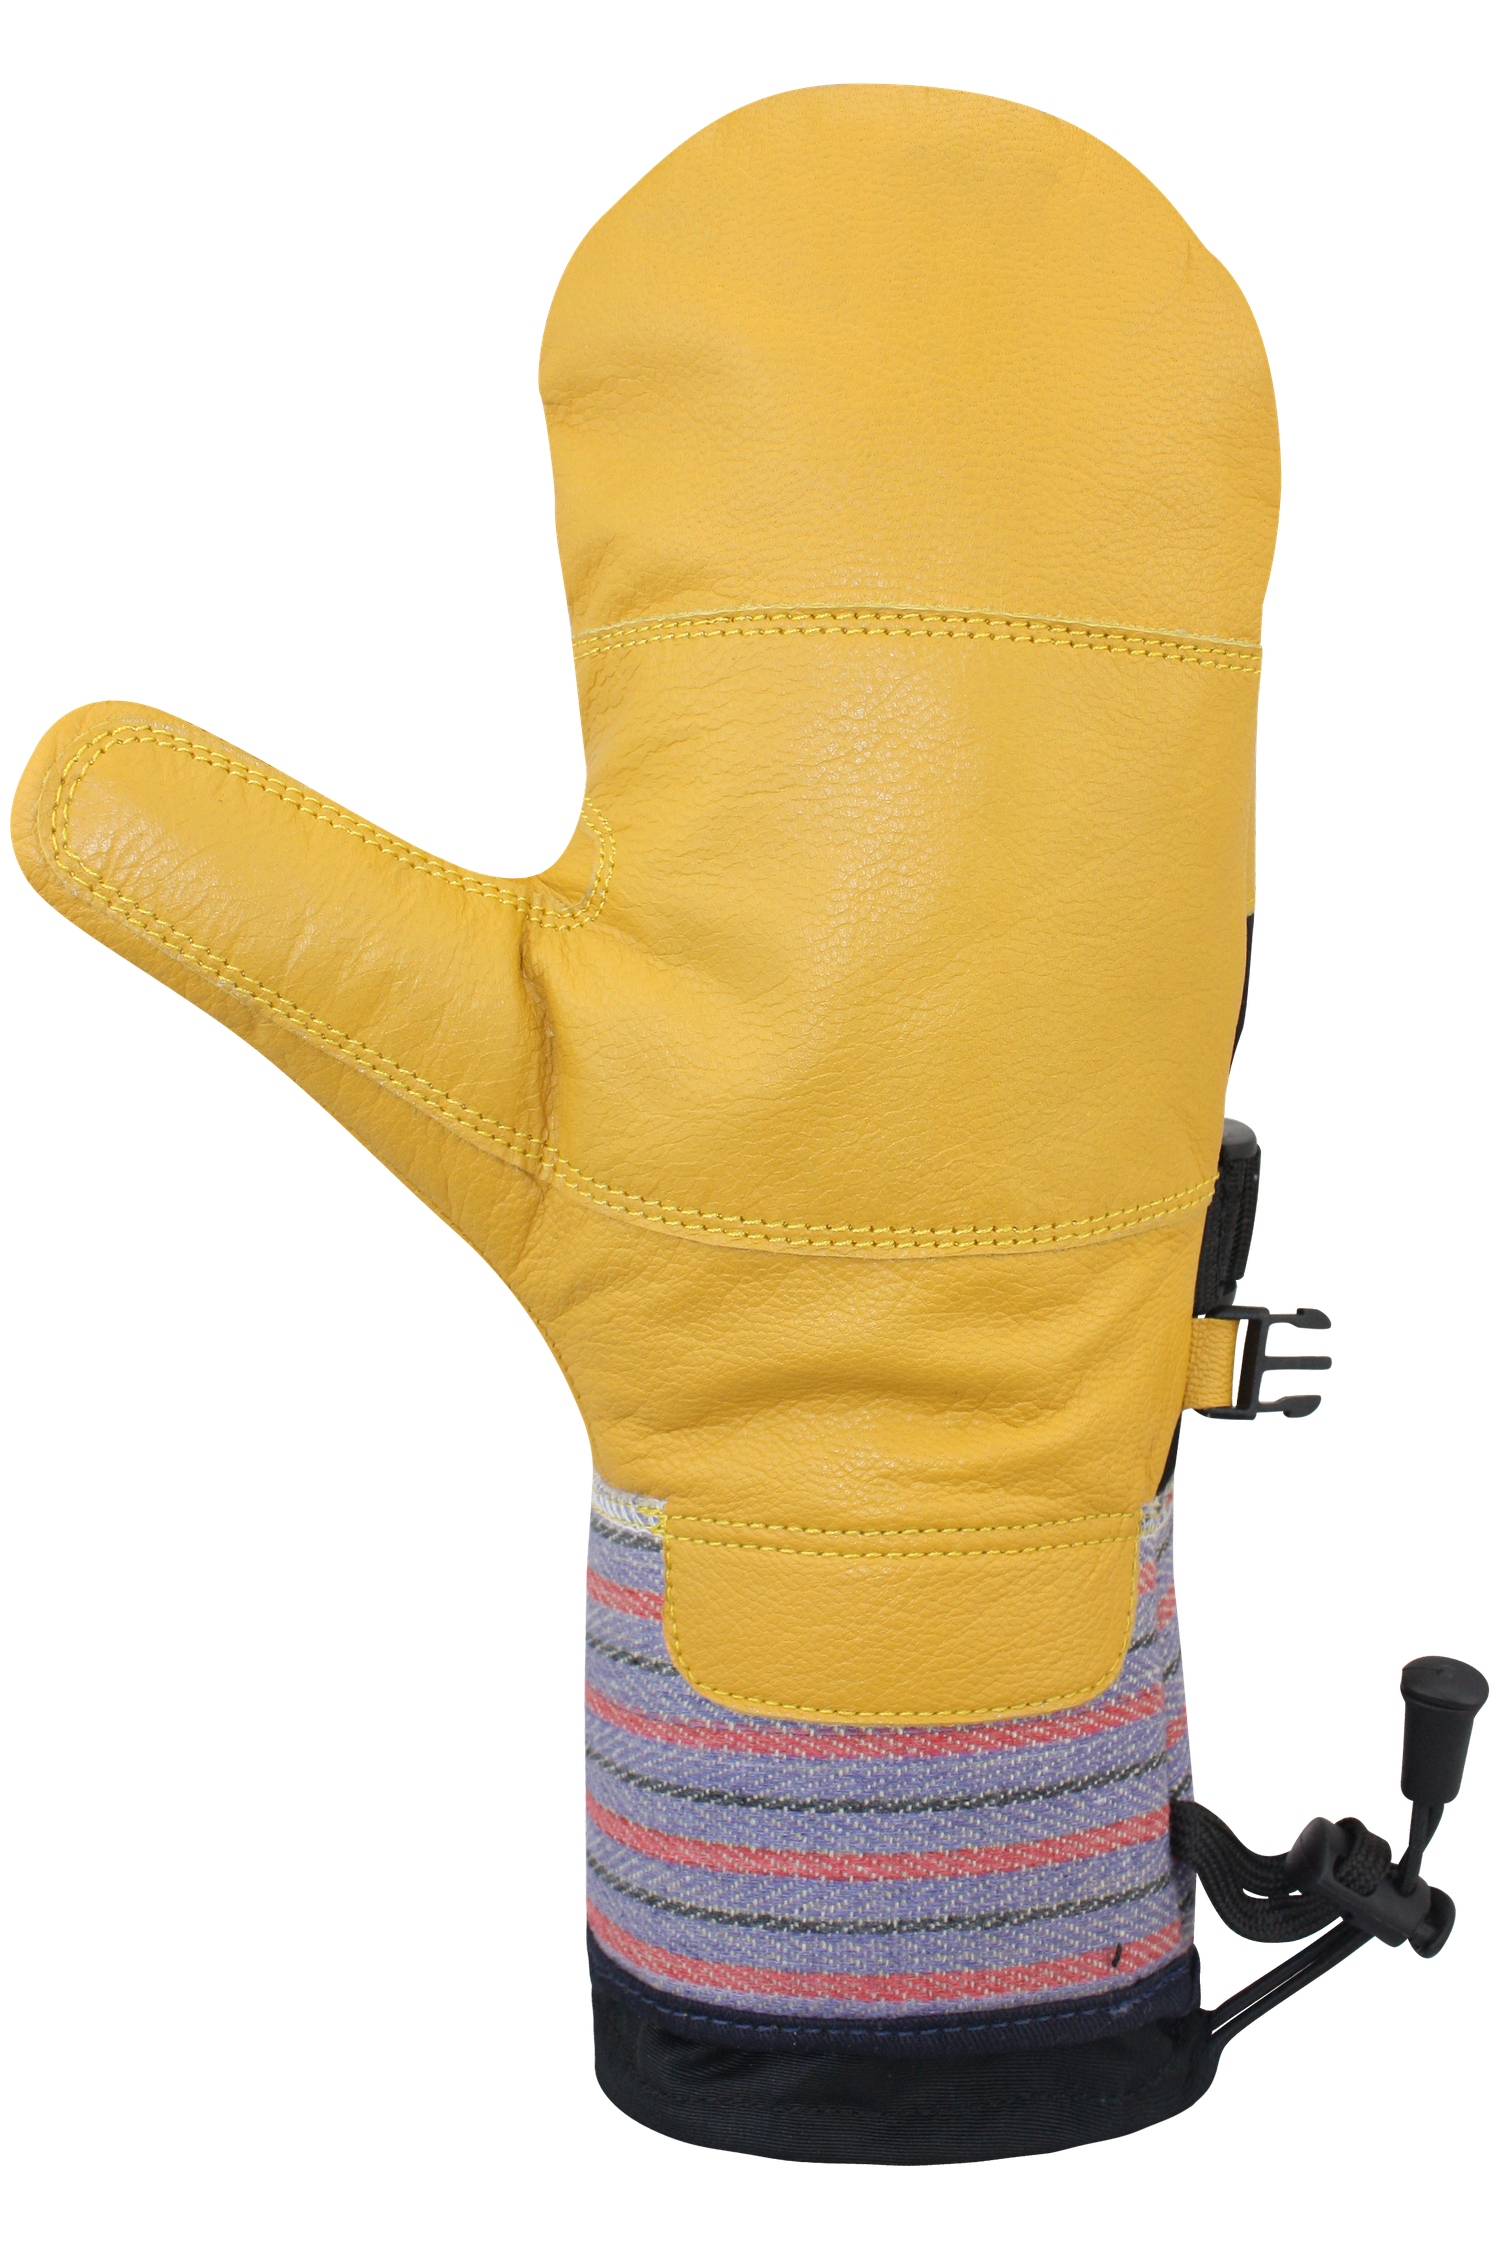 Mountain Ops 2 Mitts - Junior, Black/Gold